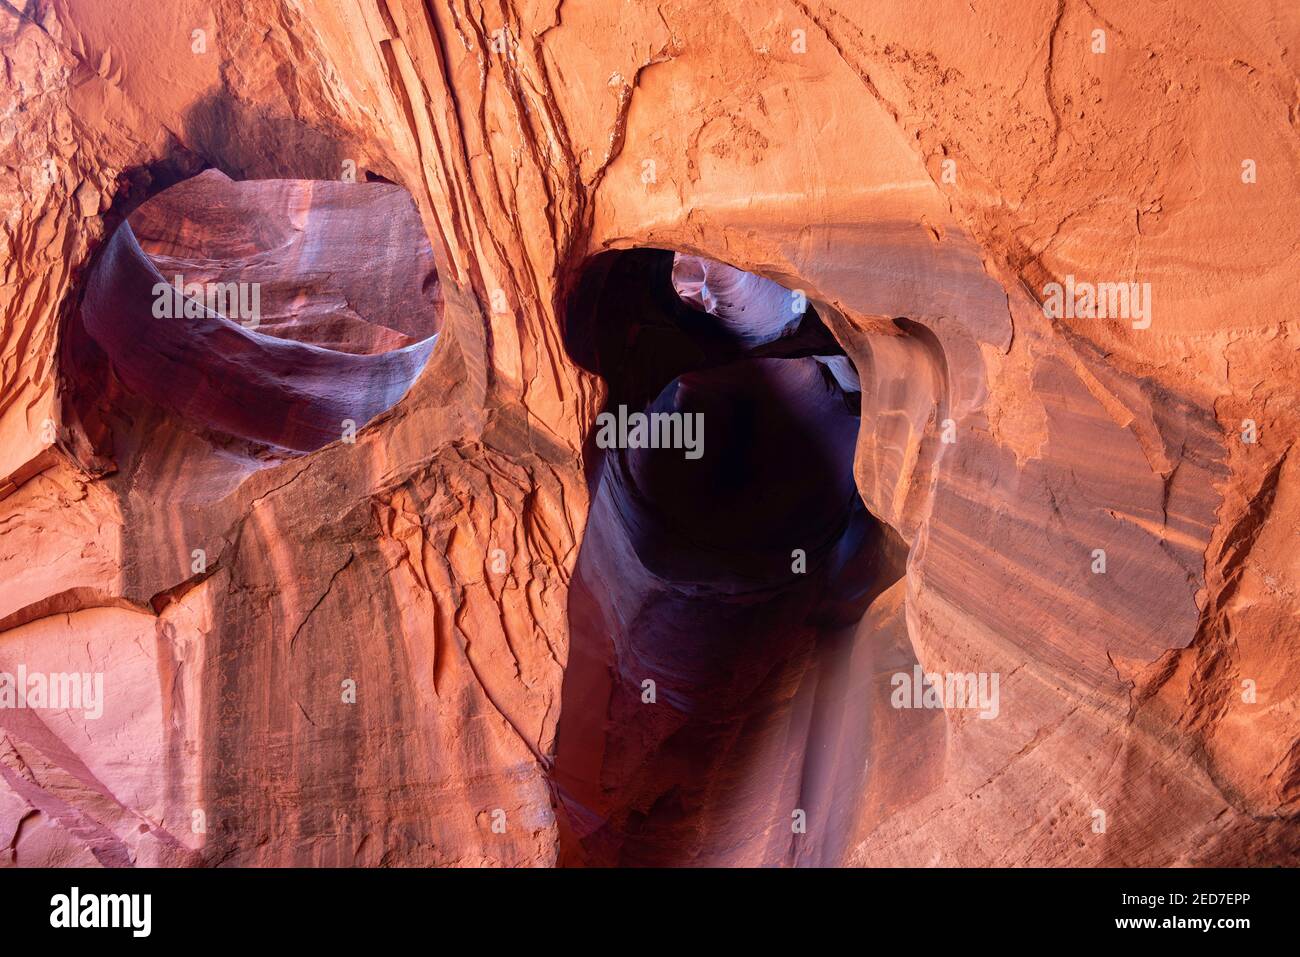 Photograph of the Golden Cathedral, a geological feature in the Grand Staircase-Escalante National Monument, Escalante, Garfield County, Utah, USA. Stock Photo